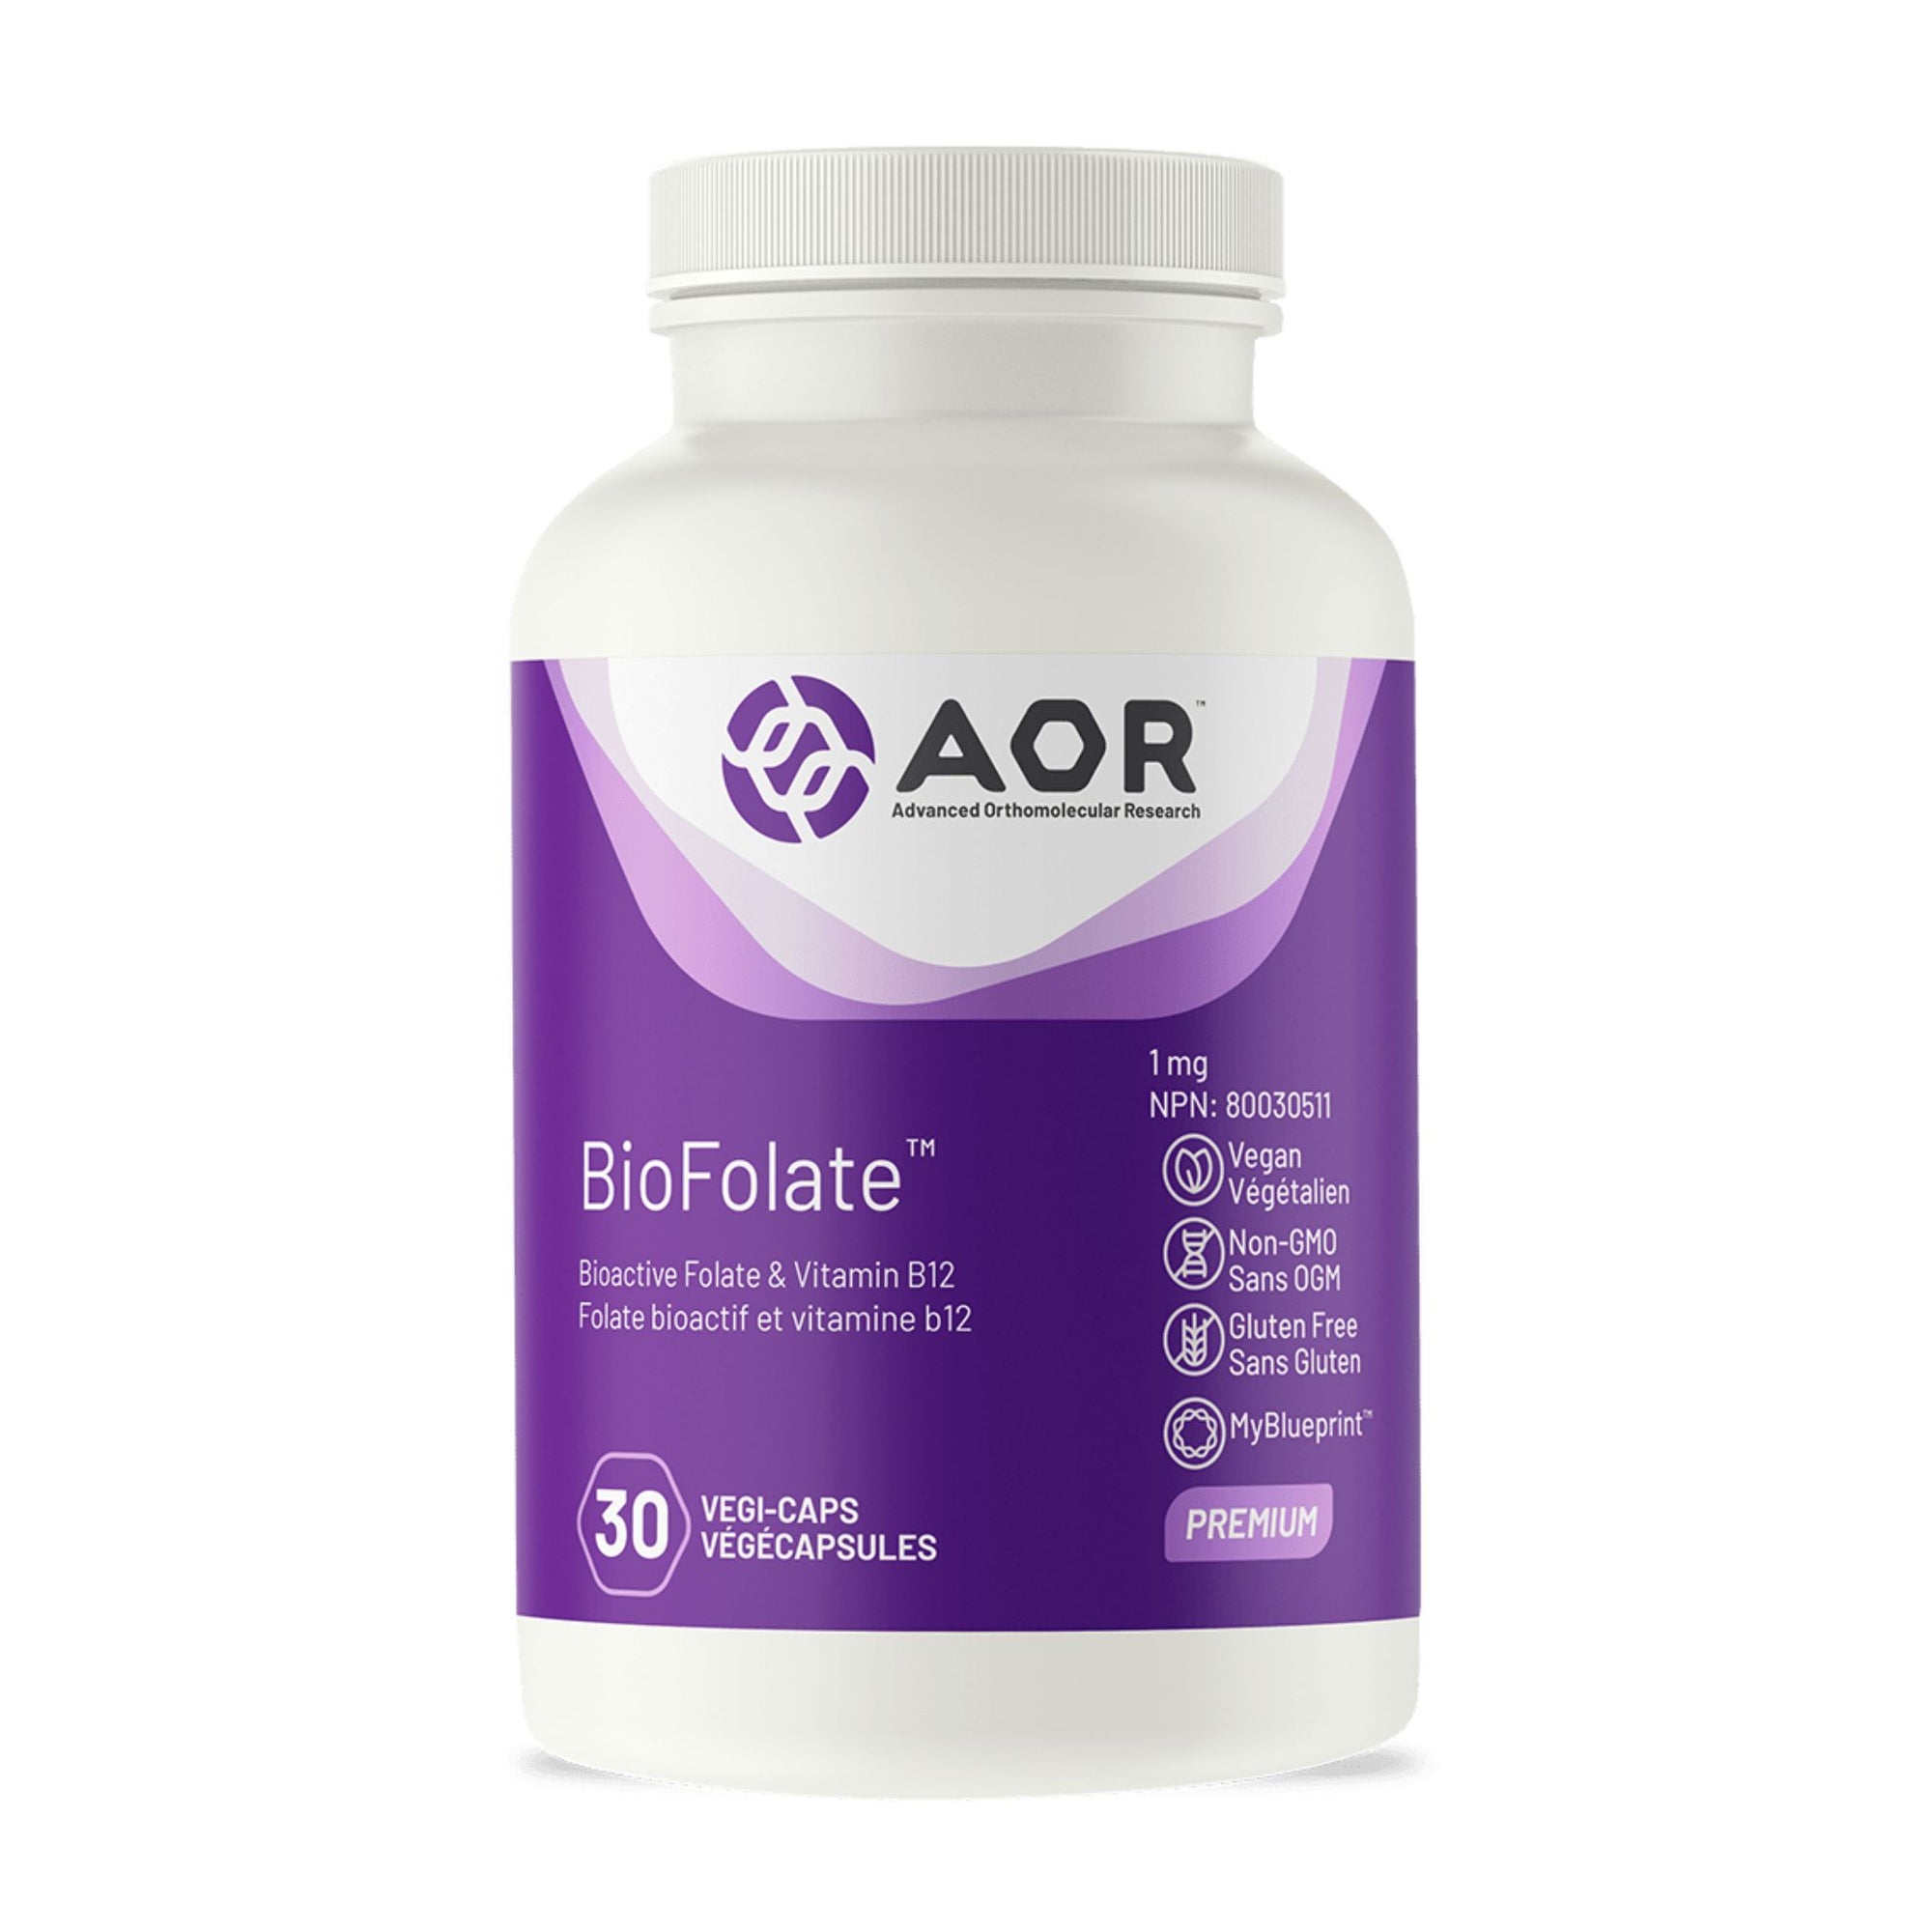 AOR BioFolate 30 vegetable capsules 1mg dose - front of bottle - Bioactive folate and vitamin B12